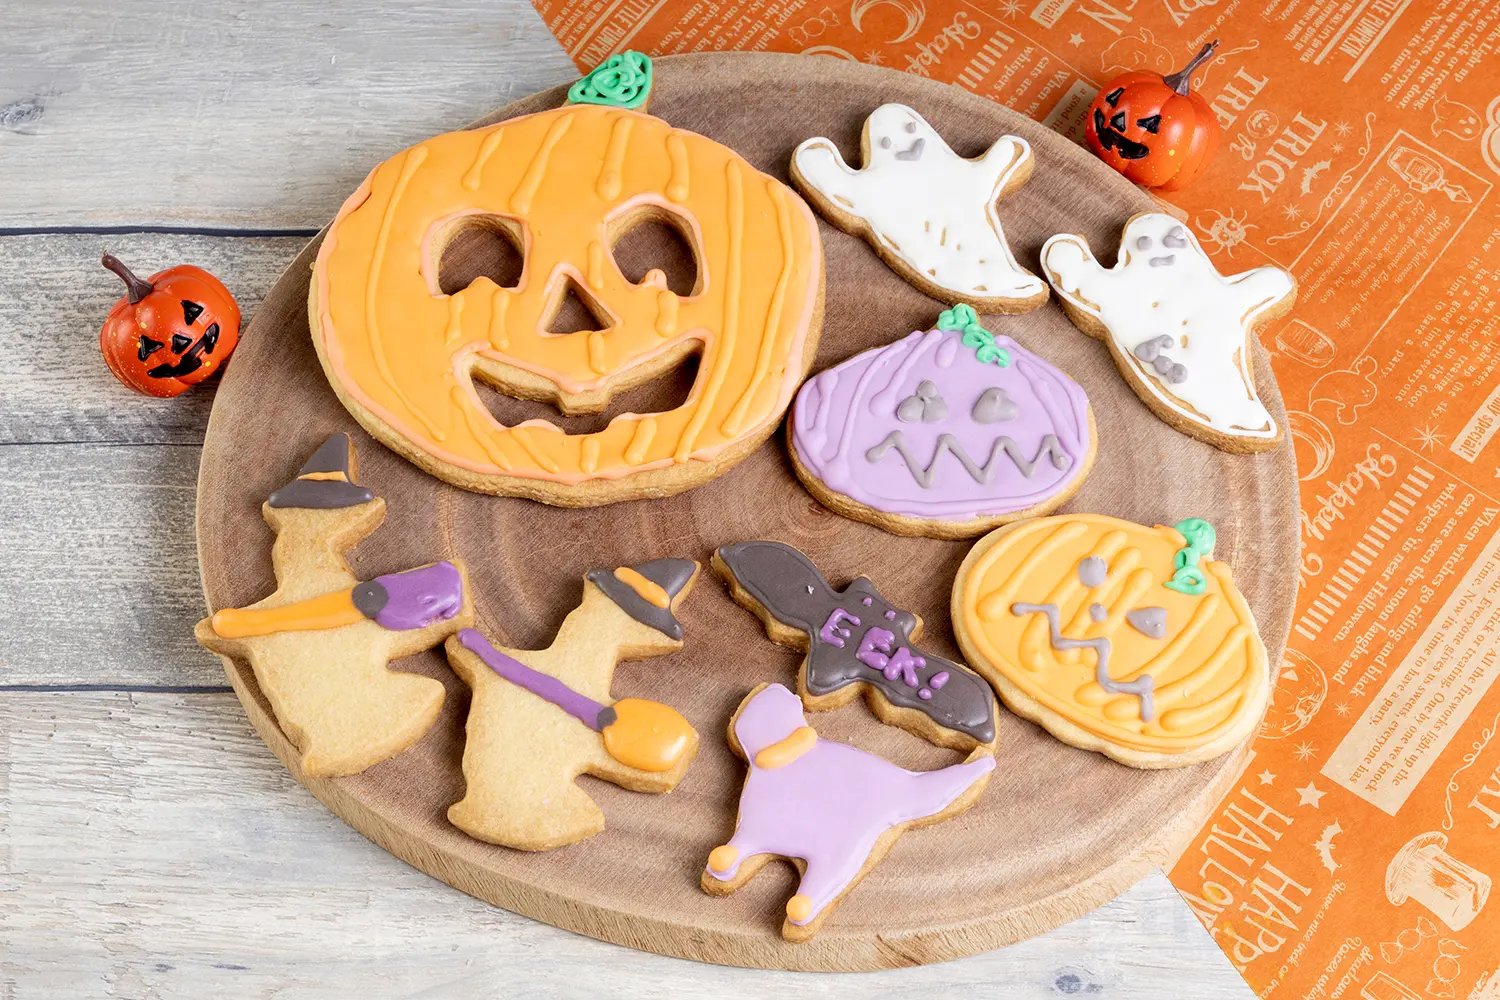 Discover our great selection of Halloween at Globalkitchen Japan.